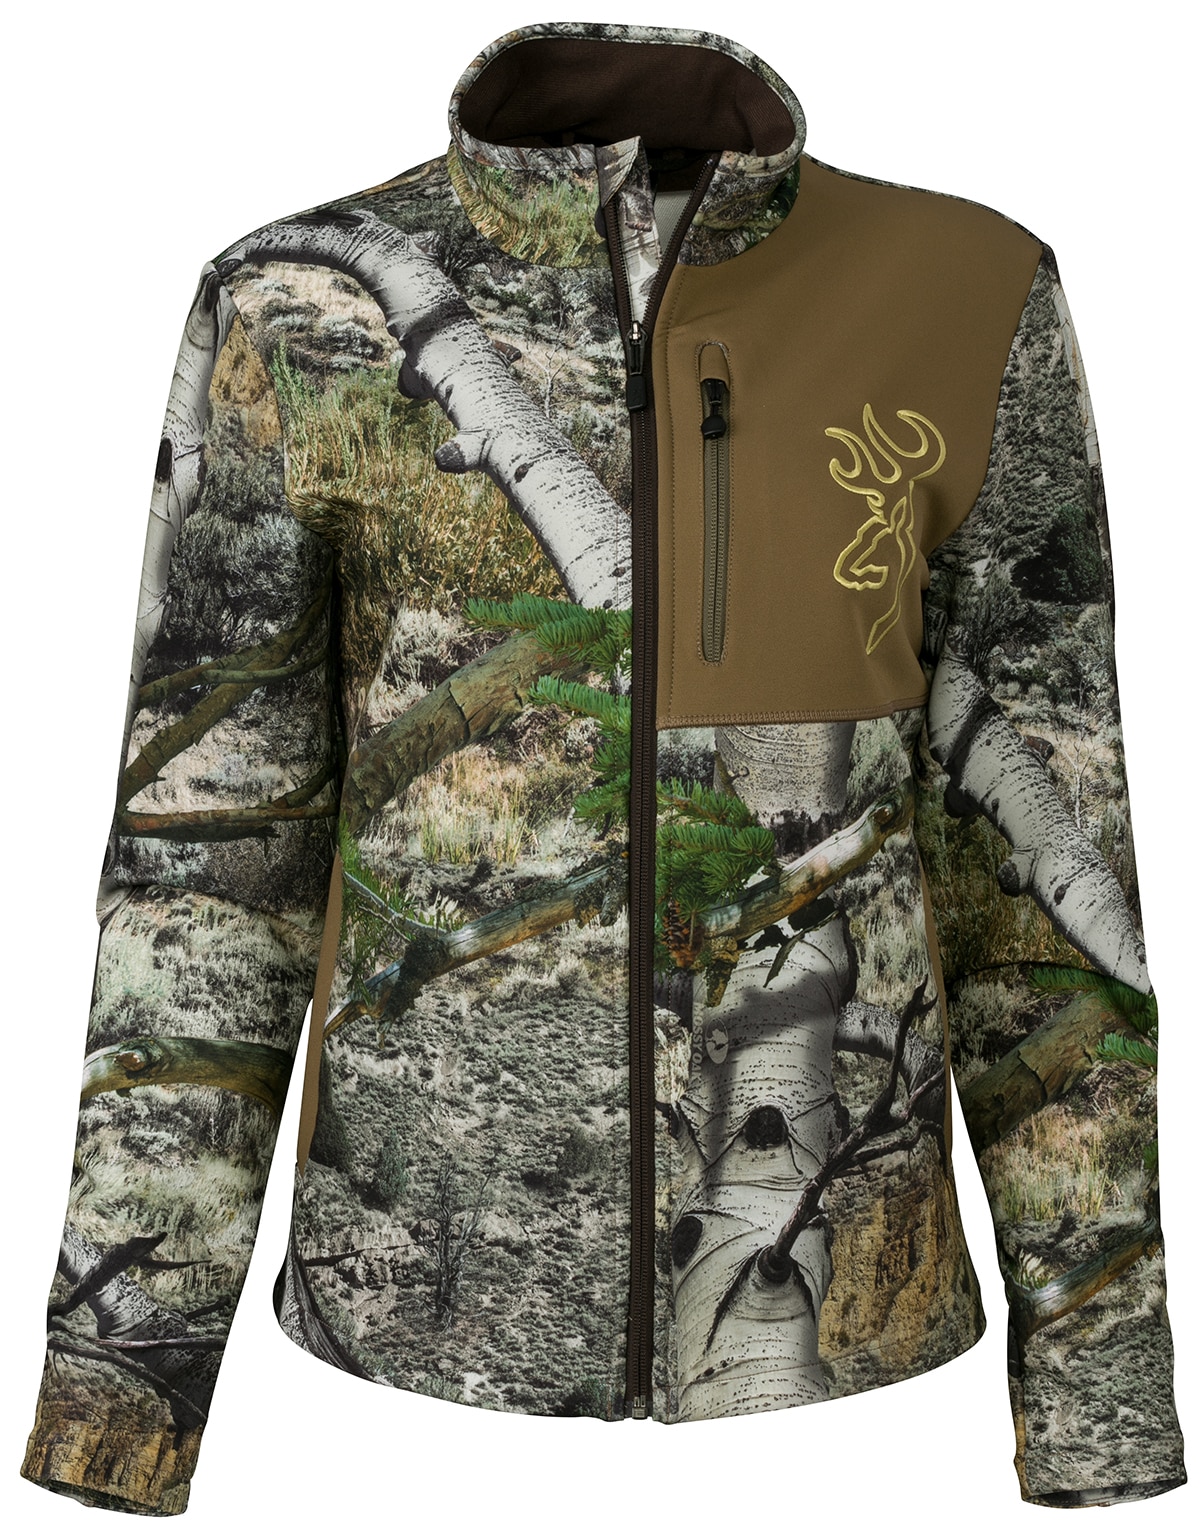 The Hell's Canyon Mercury Jacket is one of several new offerings for women. (Photo: Browning)